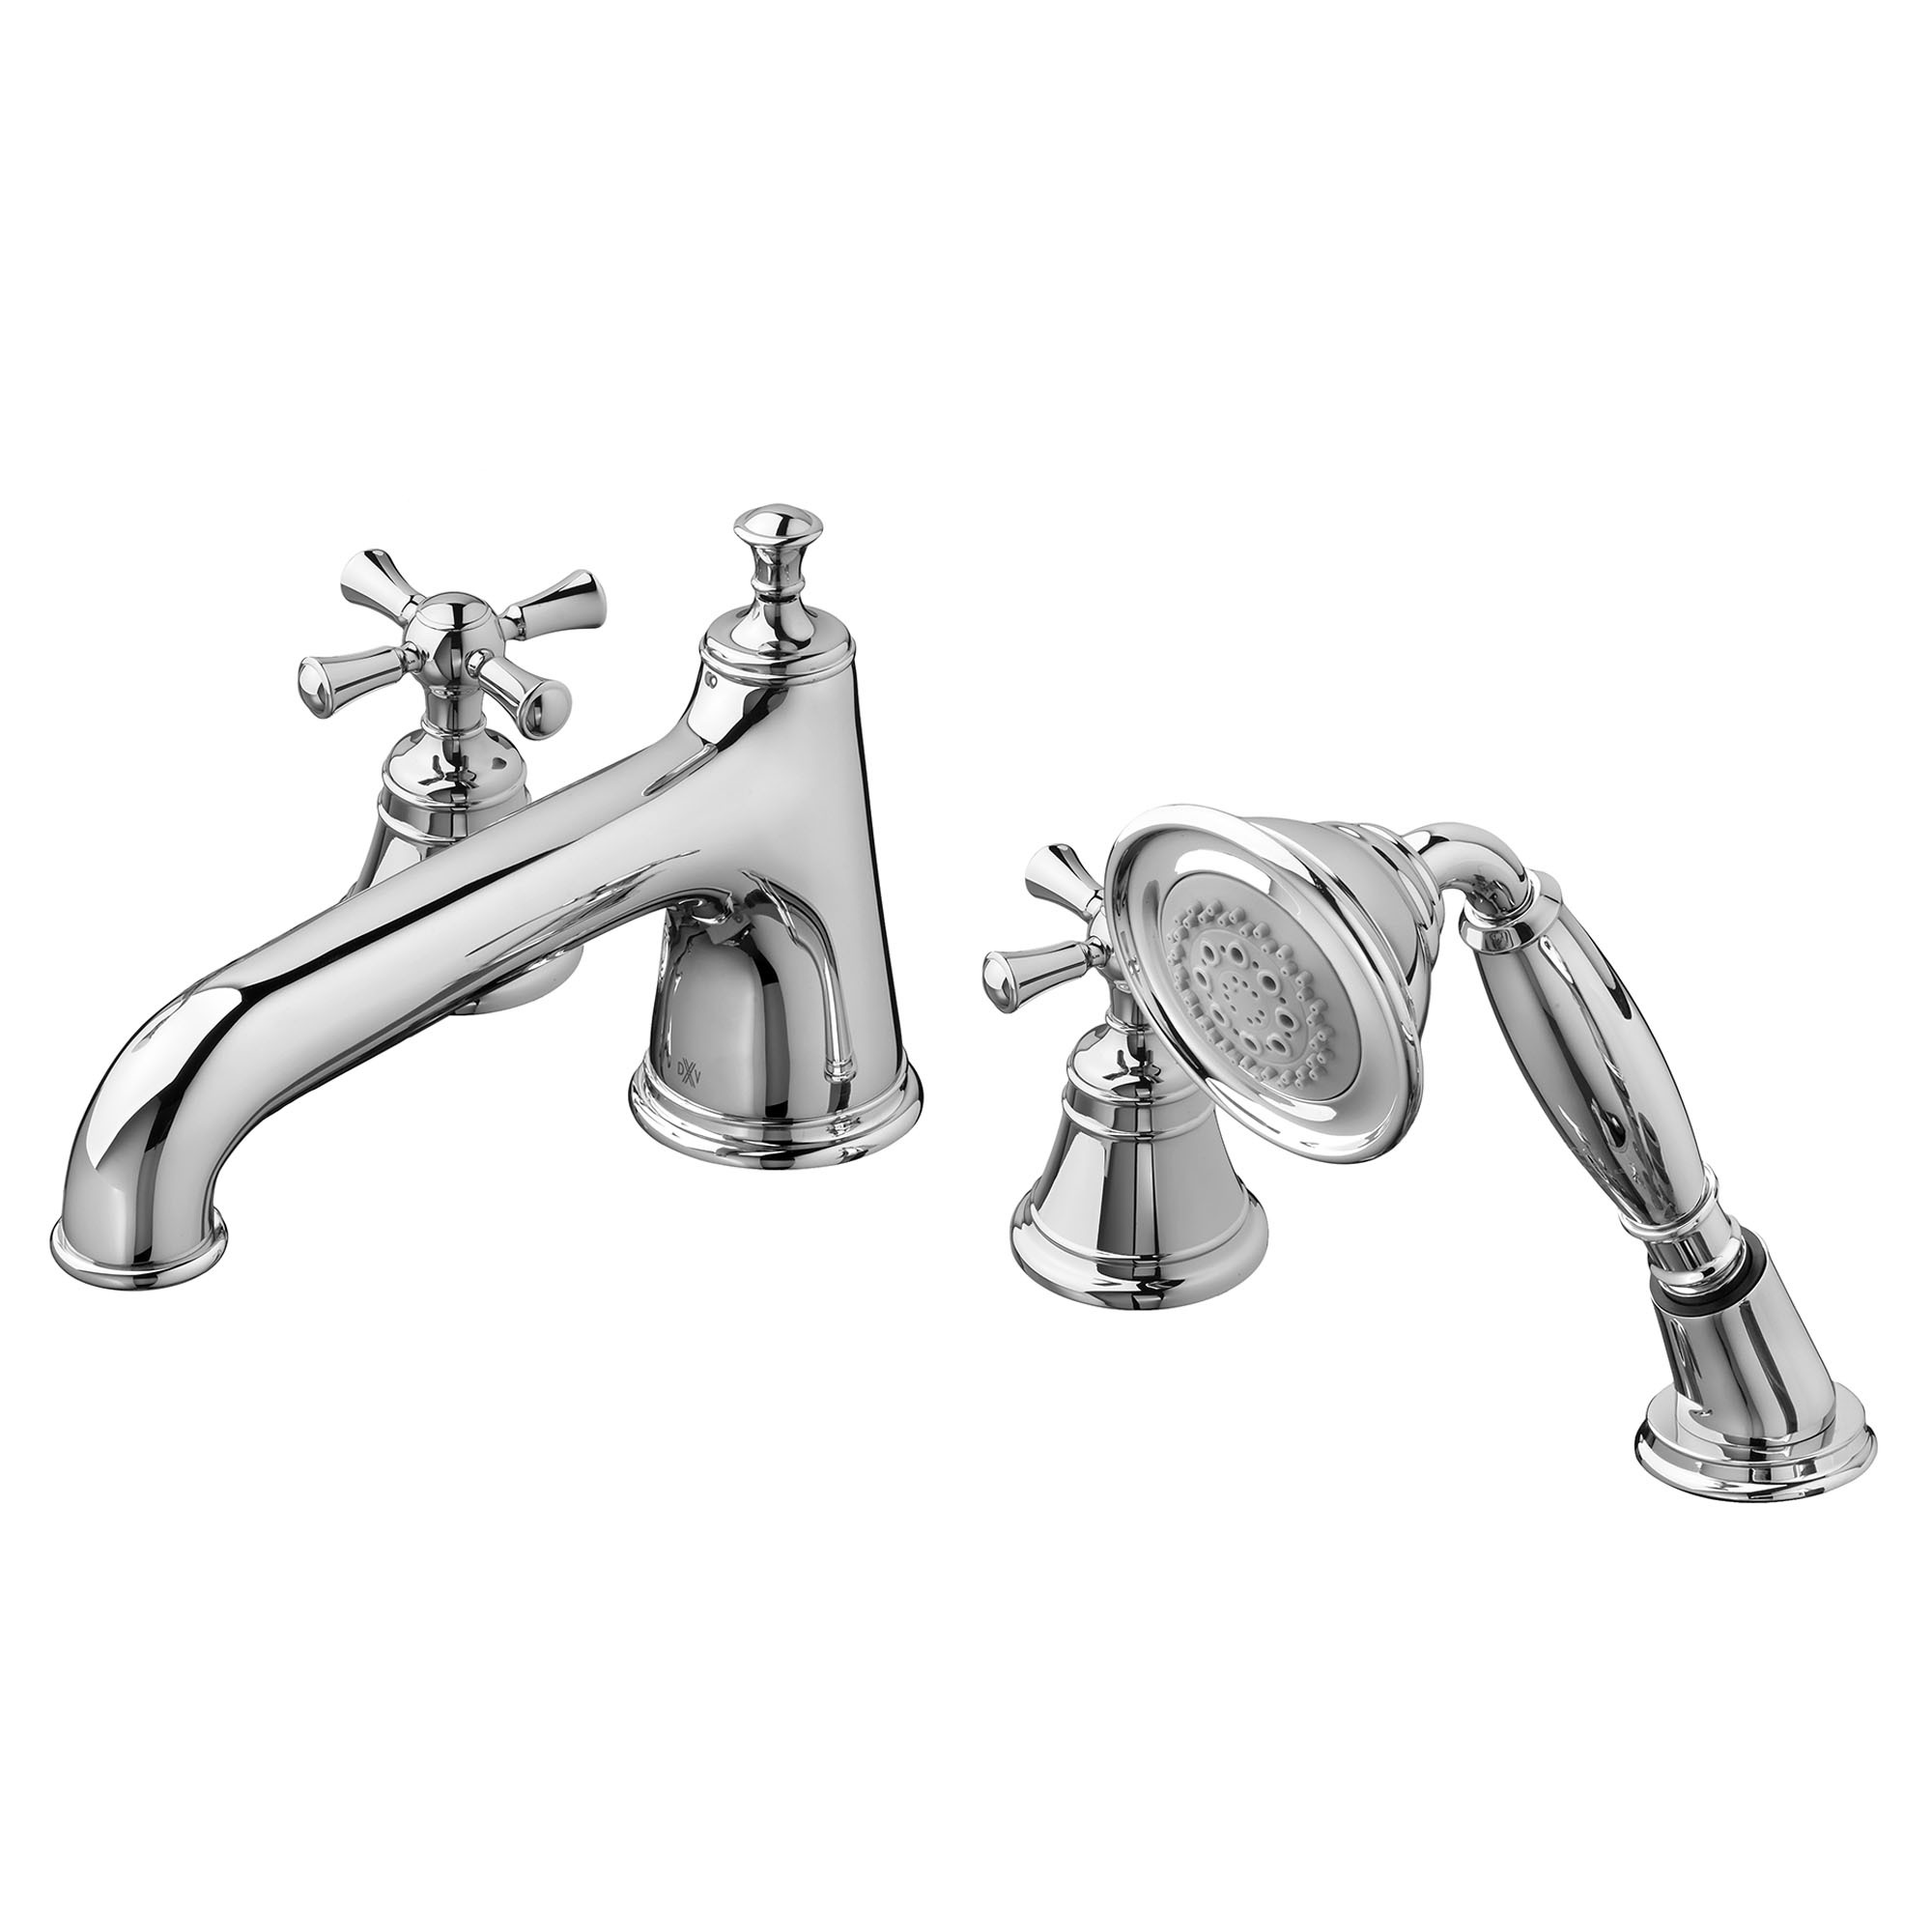 Randall 2-Handle Deck Mount Bathtub Faucet with Hand Shower and Cross Handles